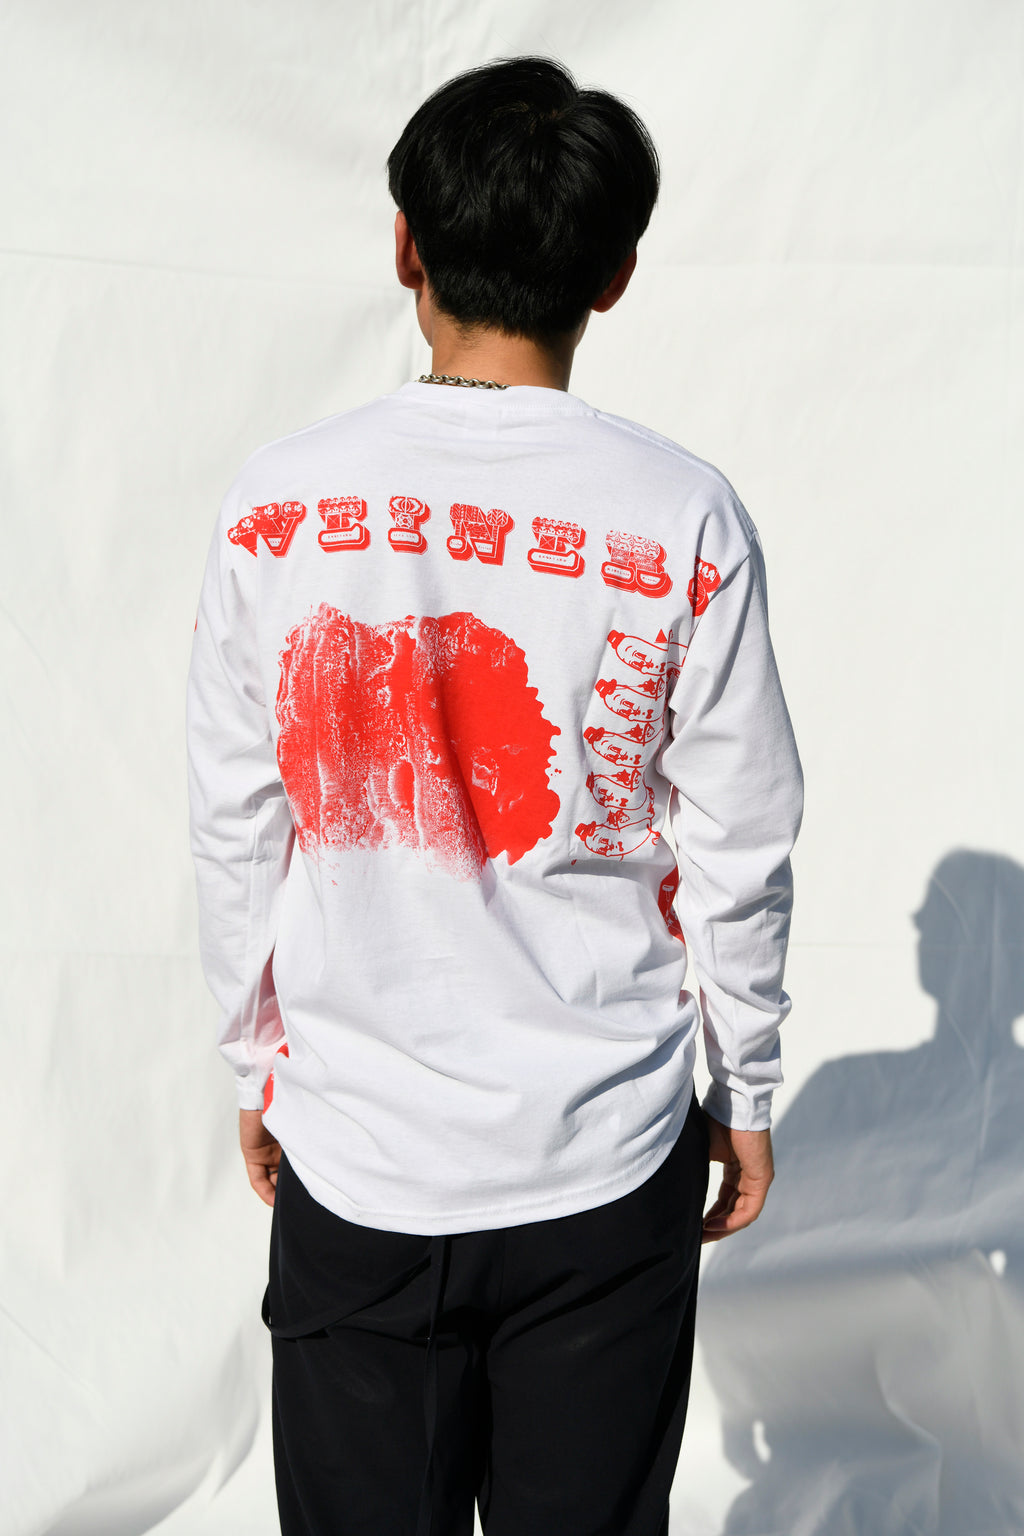 #SS2030B BASIC LONGSLEEVE T-SHIRT „WEINERS TIME“ col. white/red